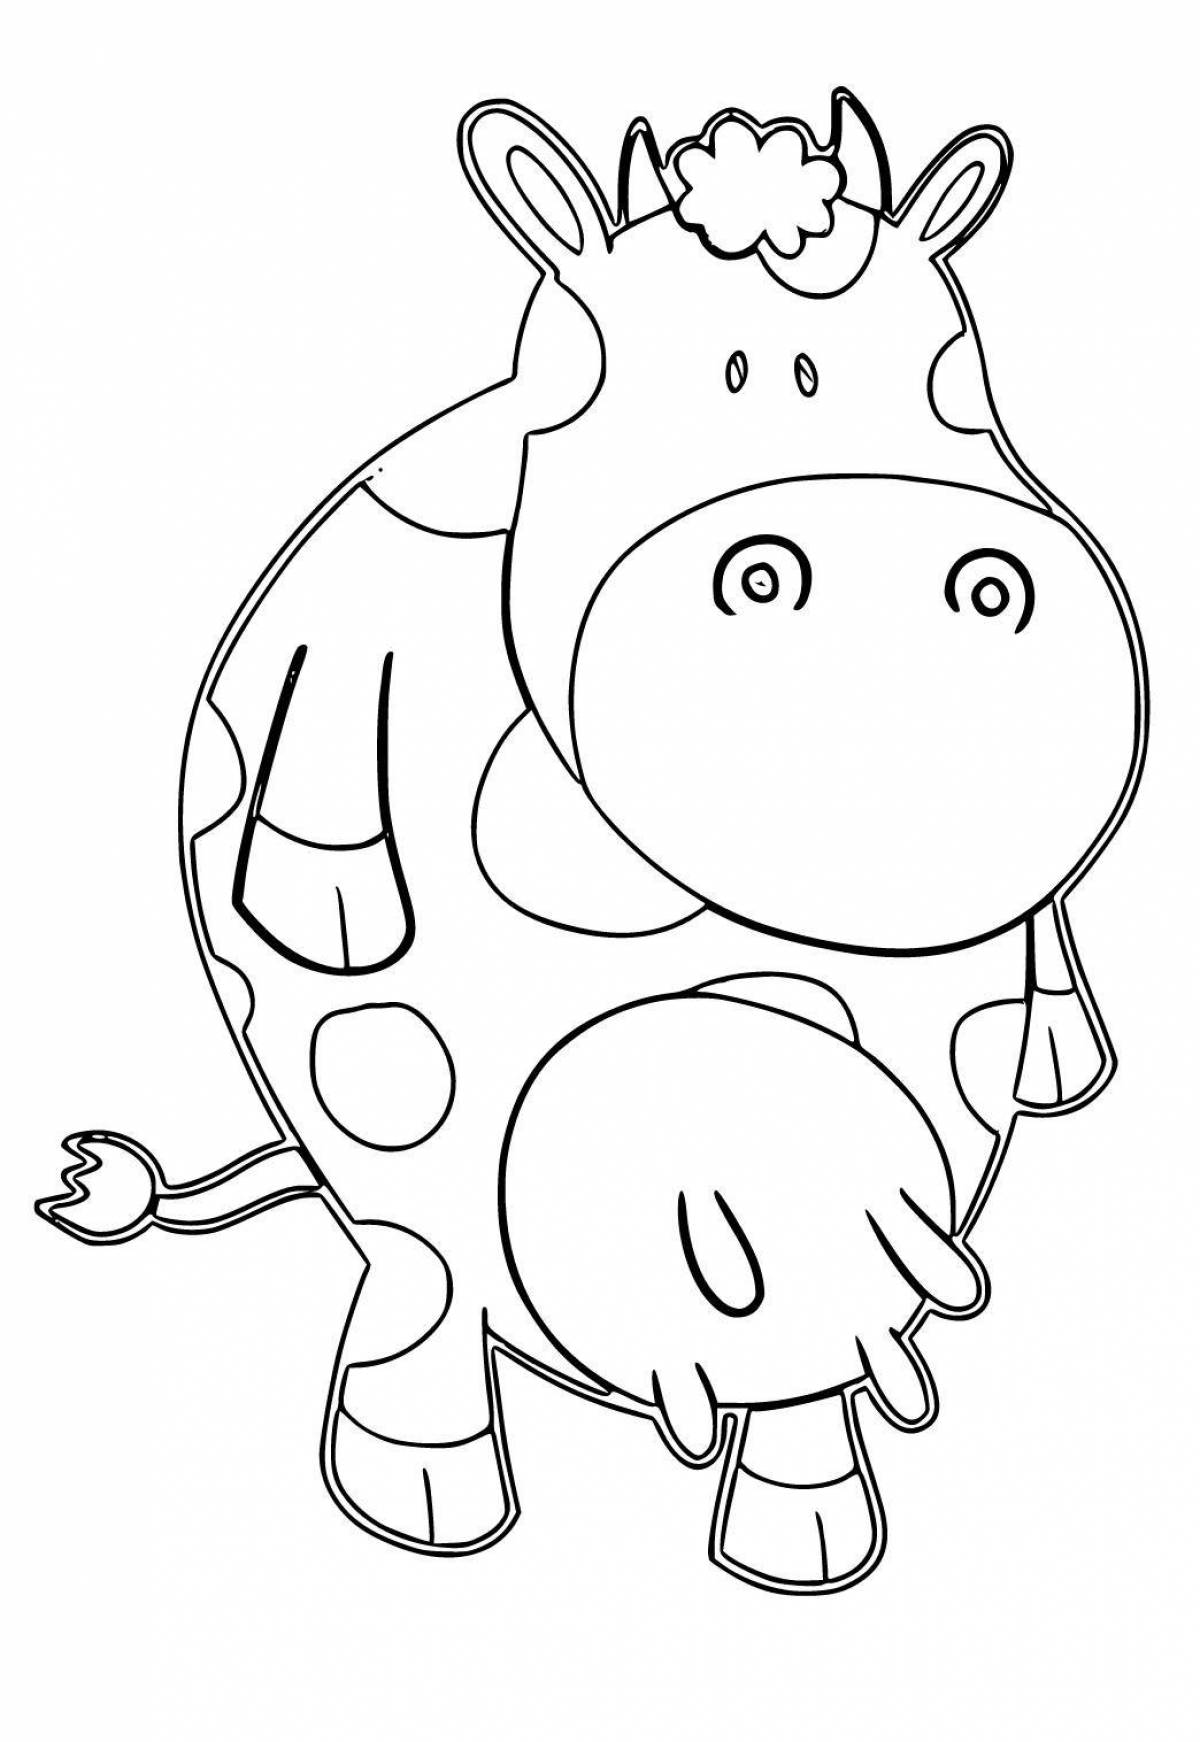 Cow coloring page for kids 3-4 years old